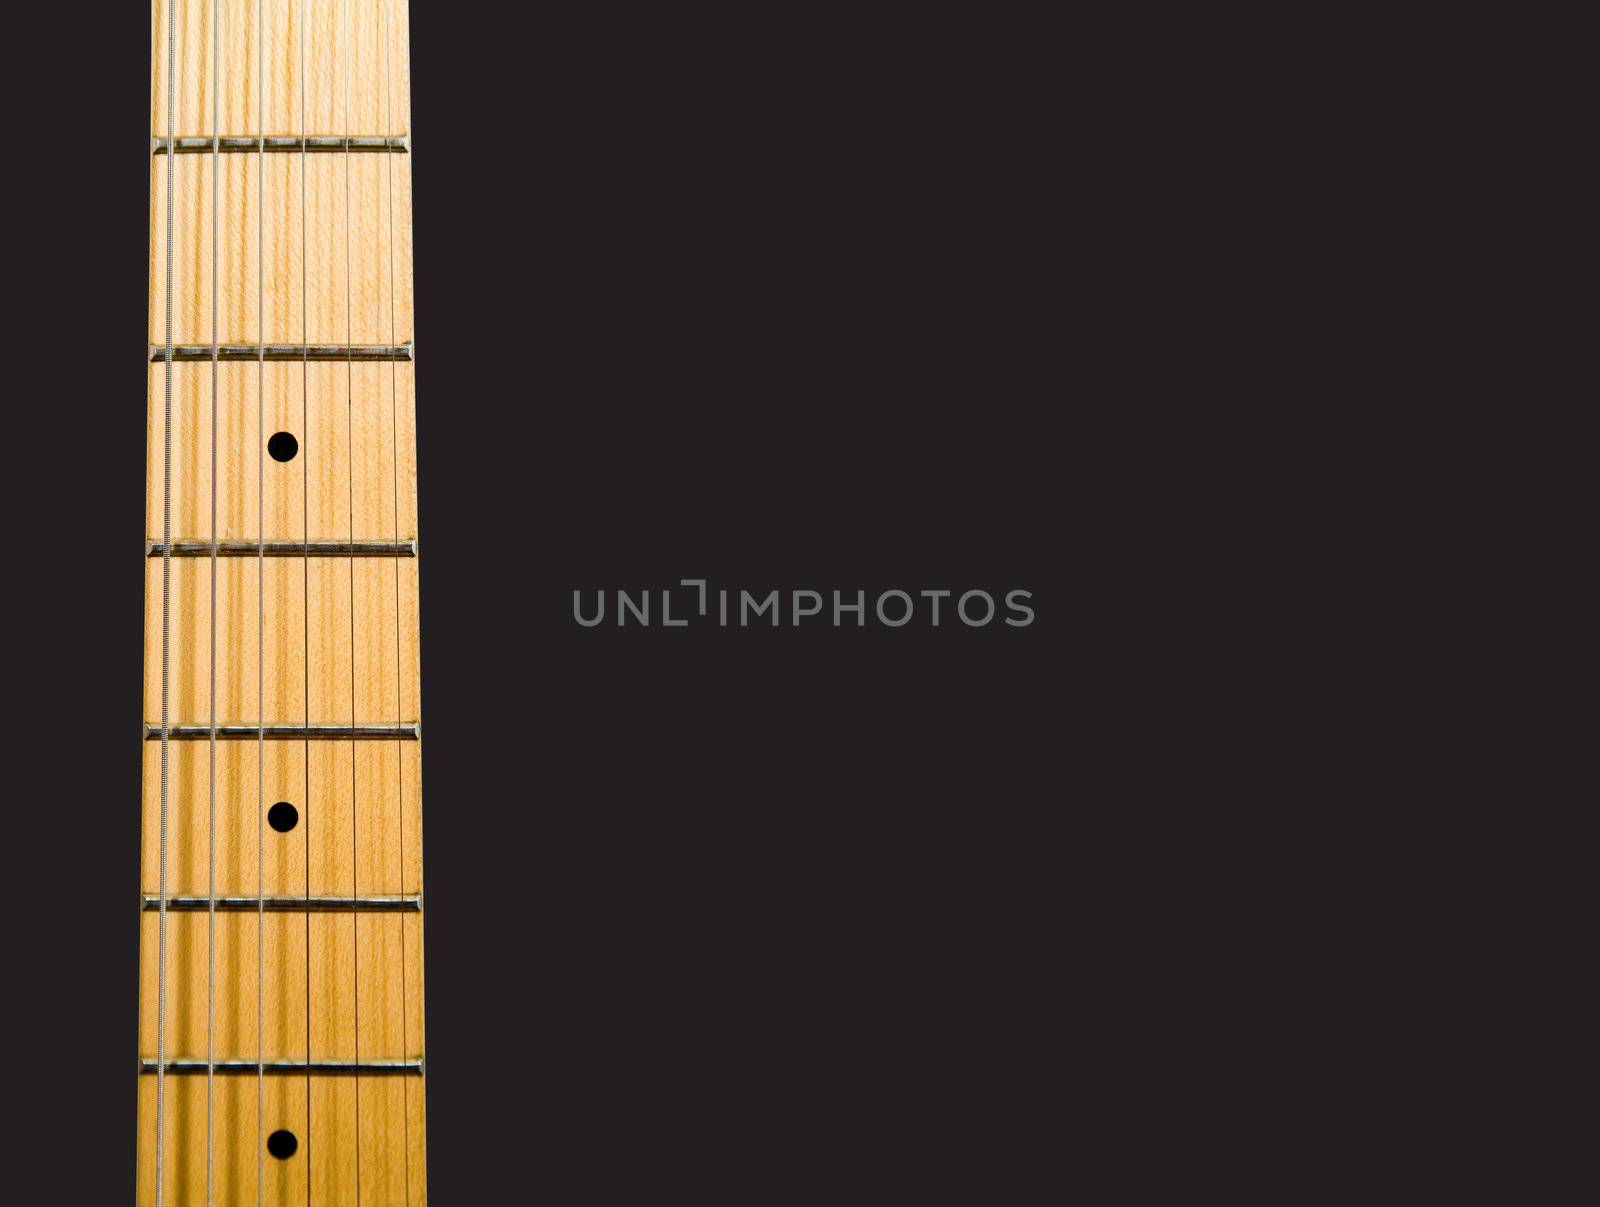 guitar's neck over black background with notes - hi res 12,7 mpix